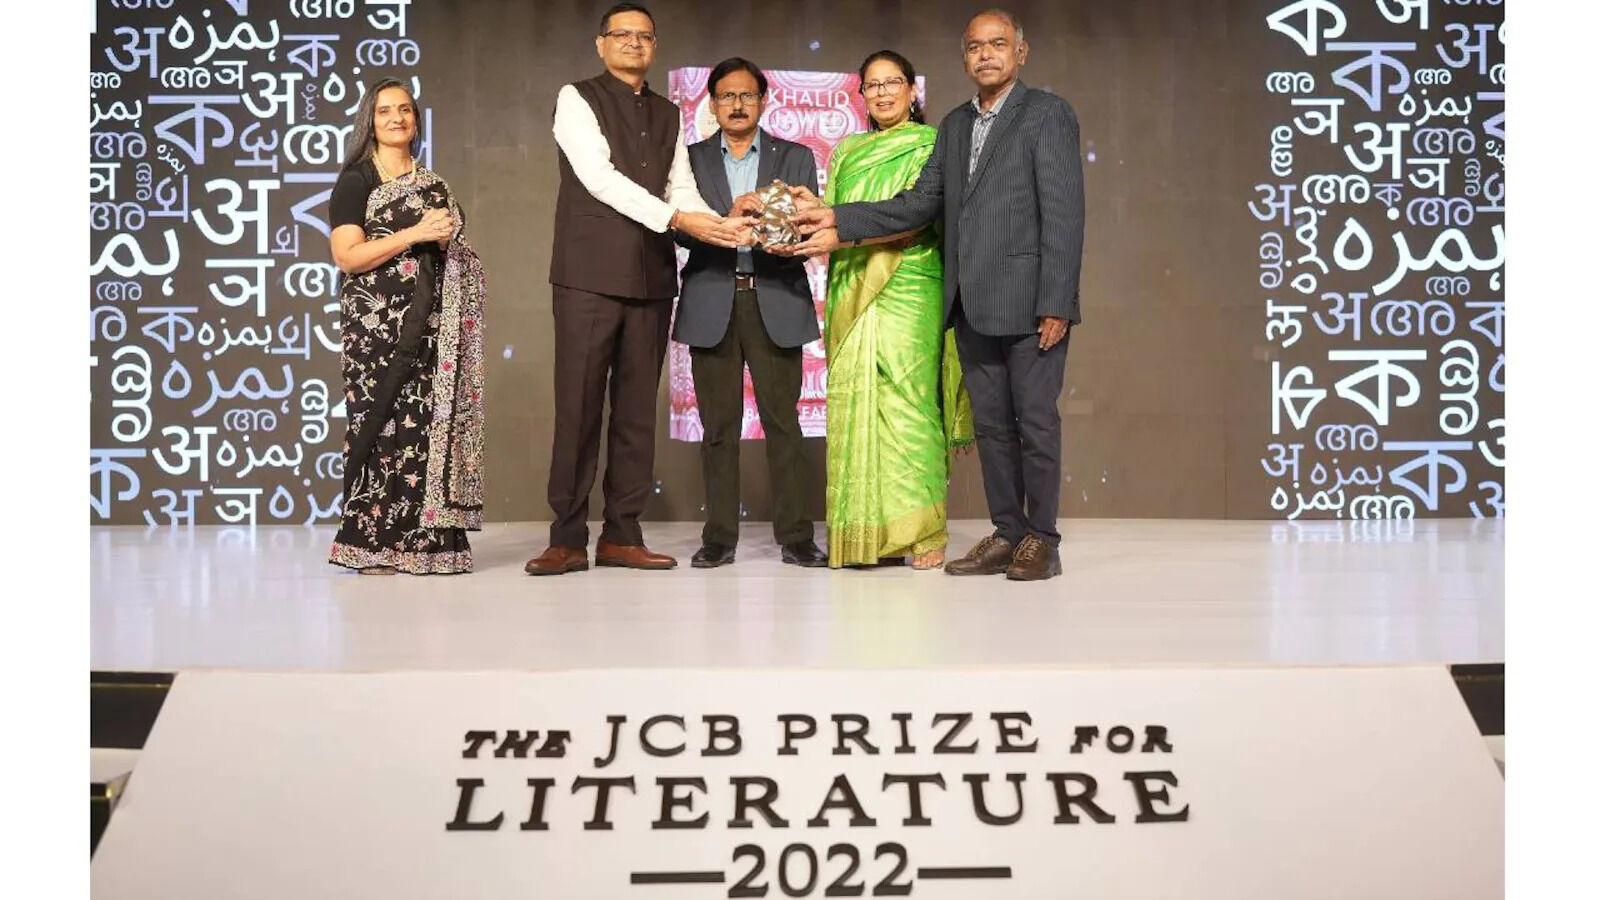 "Paradise of Food" by Khalid Jawed, Won the 5th JCB Literary Prize